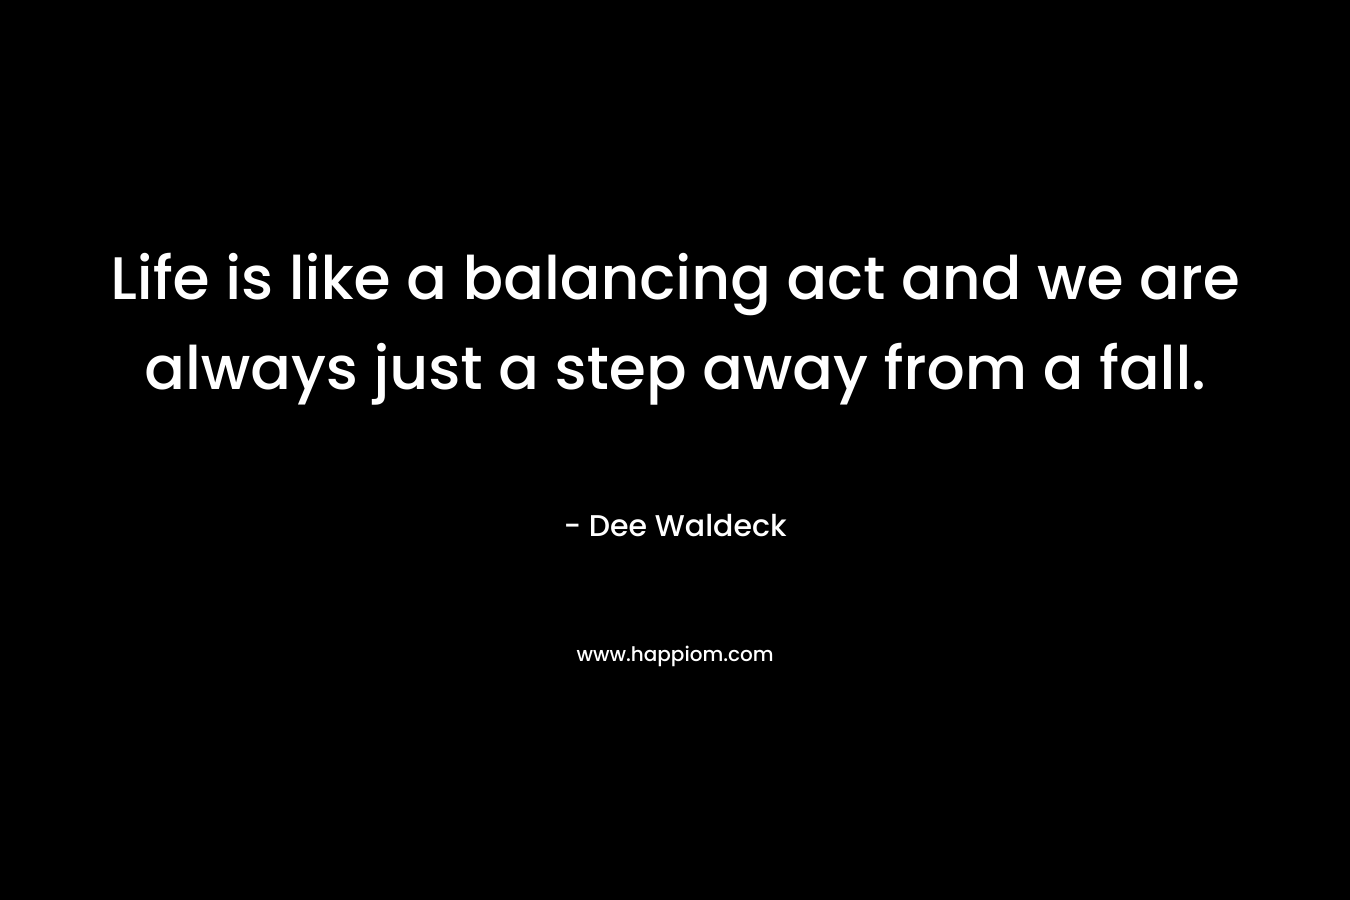 Life is like a balancing act and we are always just a step away from a fall.